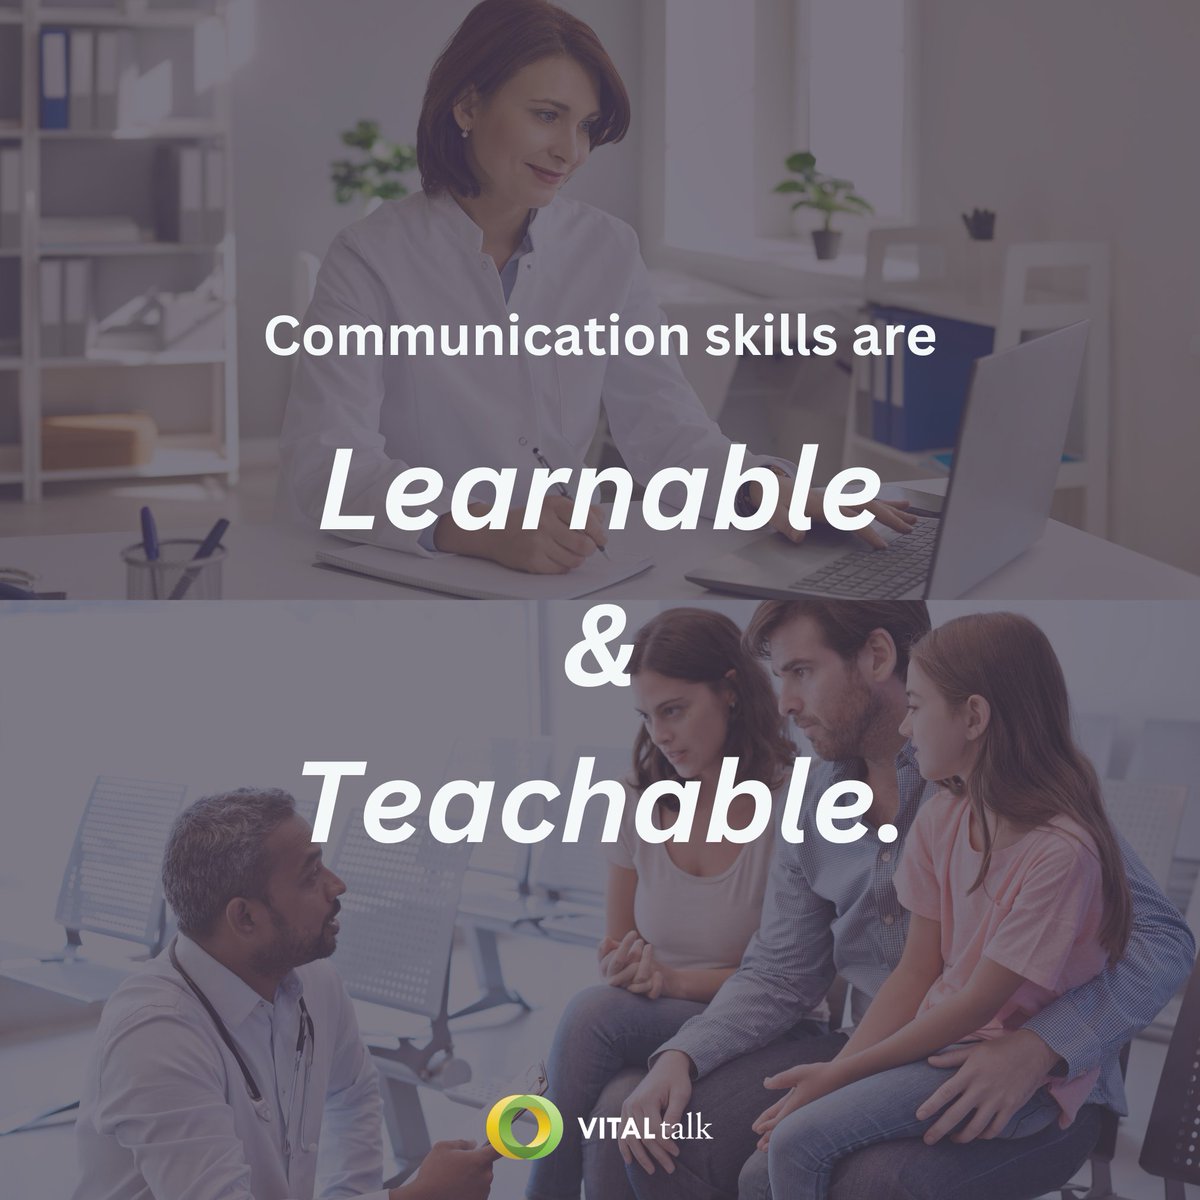 VitalTalk makes communication skills for serious illnesses learnable. Our evidence-based trainings empower both clinicians and institutions. Learn more about our offerings at chooseyourpath.vitaltalk.org #VitalTalk #CommunicationSkills #EvidenceBasedCare